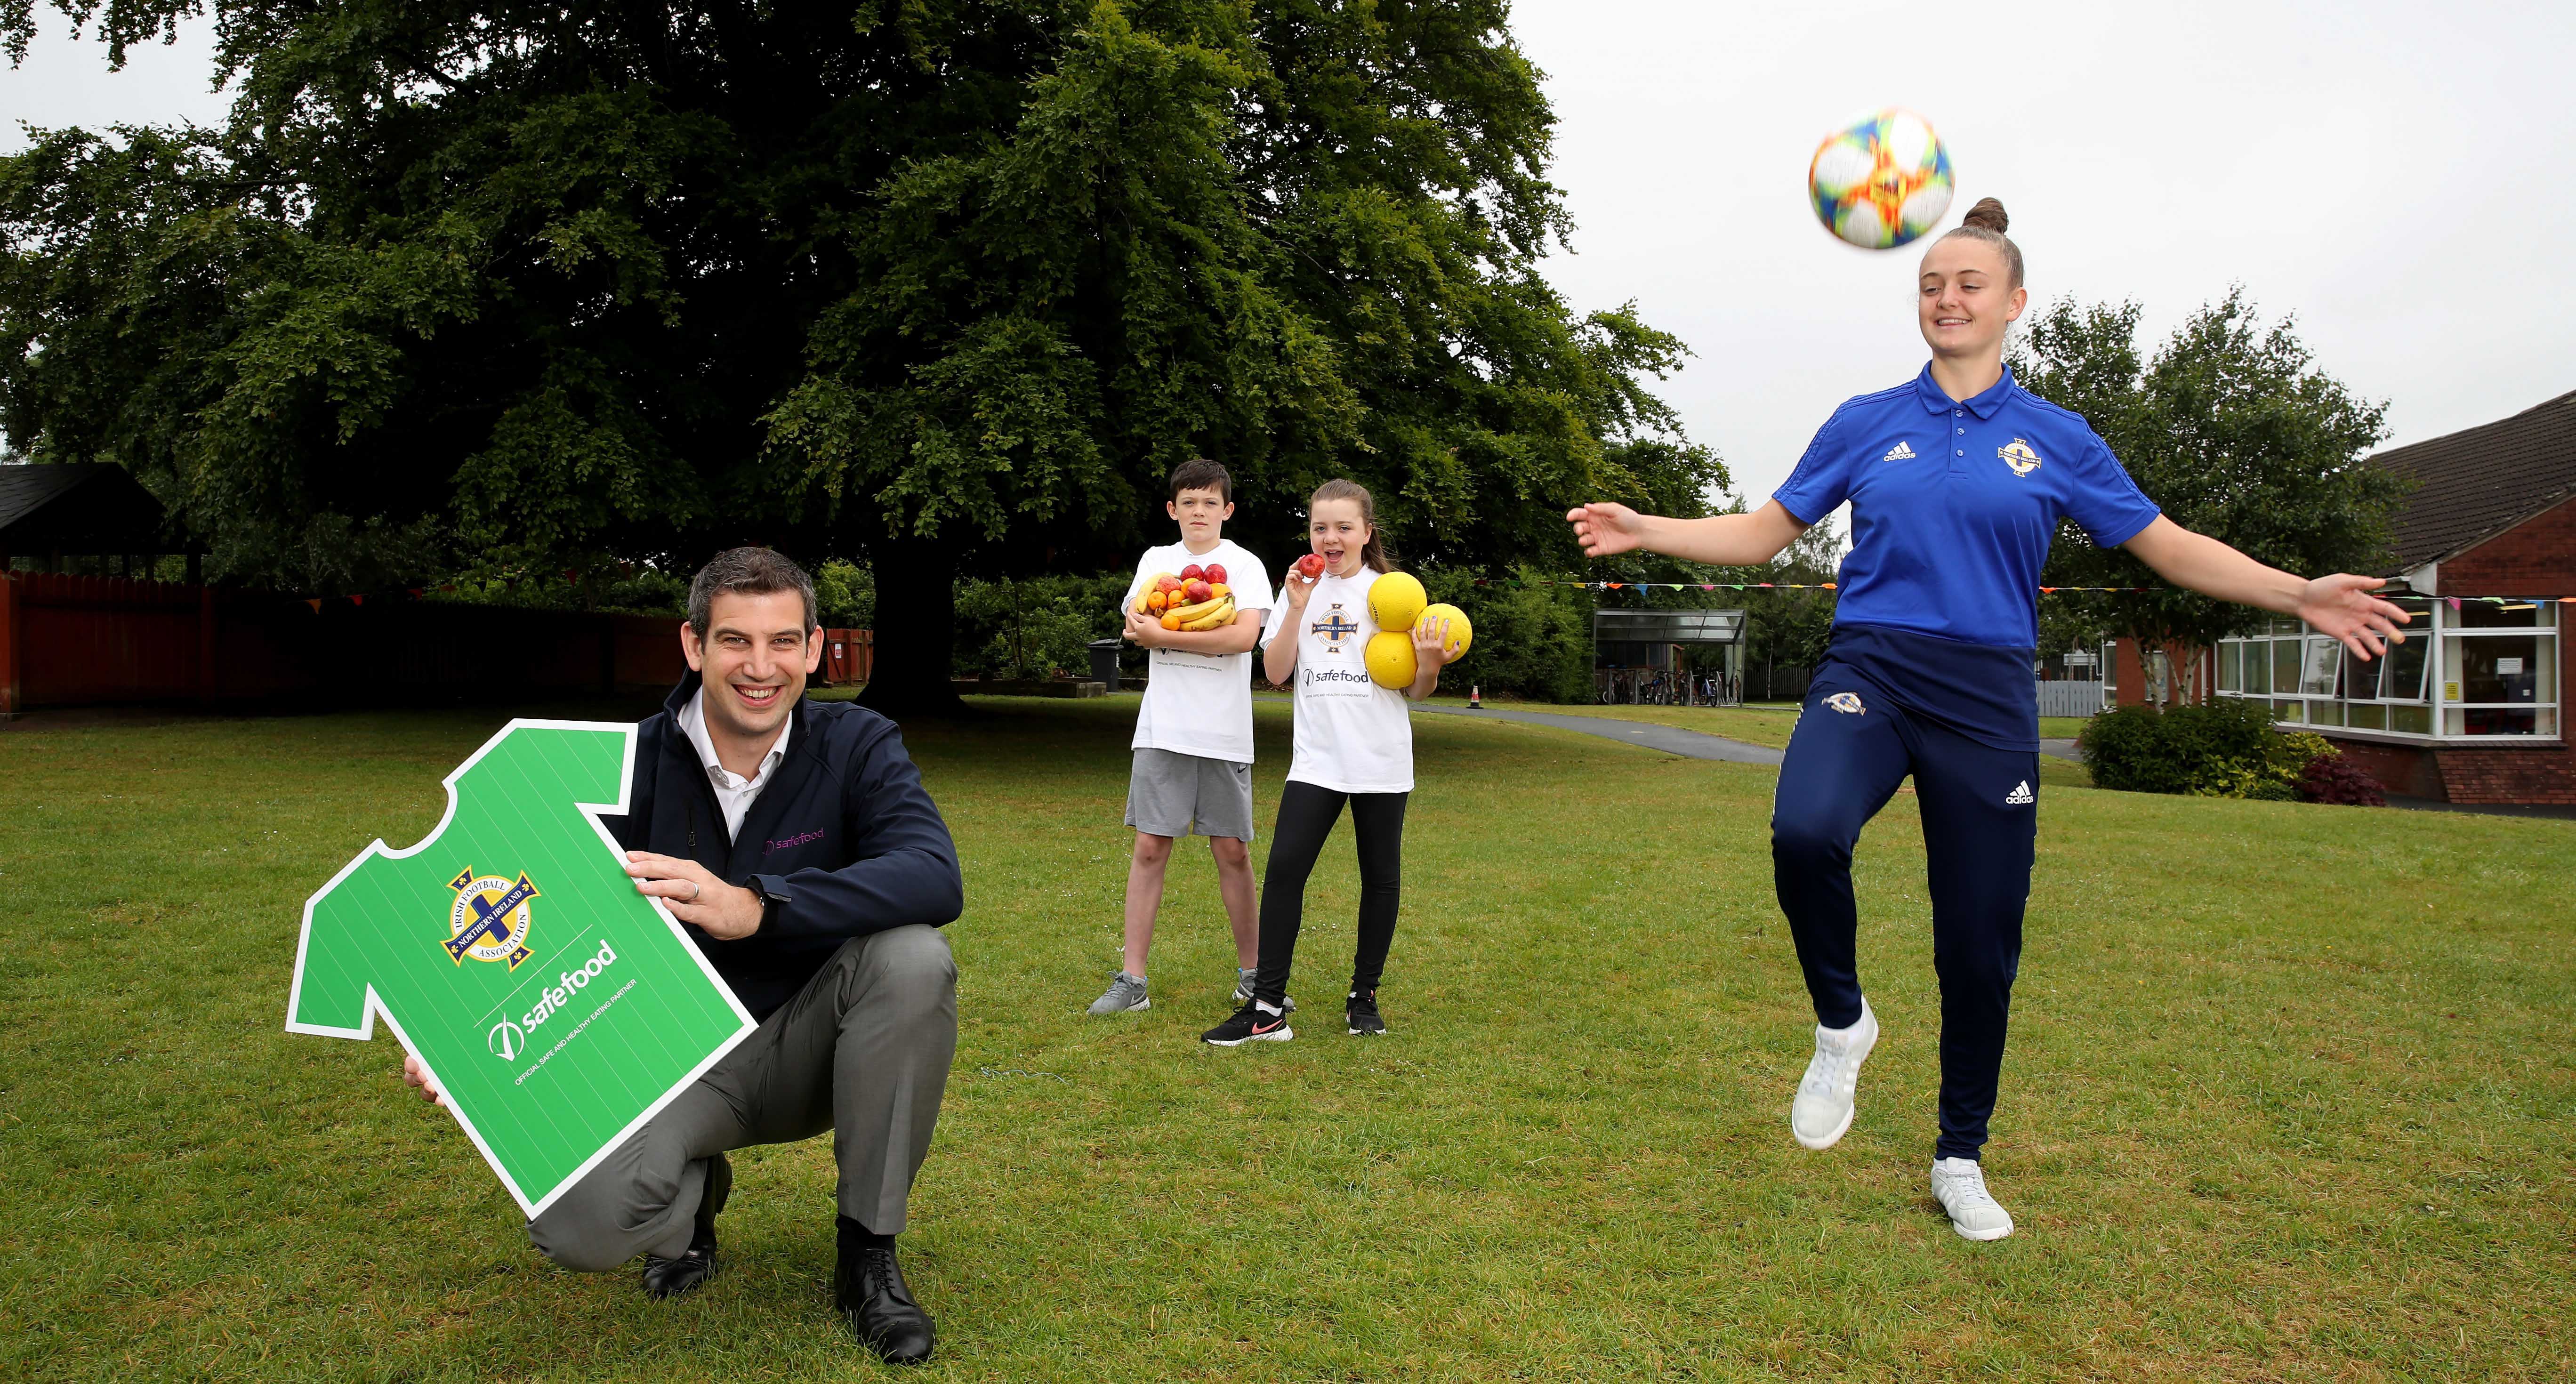 Pictured is Northern Ireland Women’s International Kerry Beattie and Andrew Castles from safefood alongside Ballymacash Primary School pupils Leon Roberts and Alana Singleton